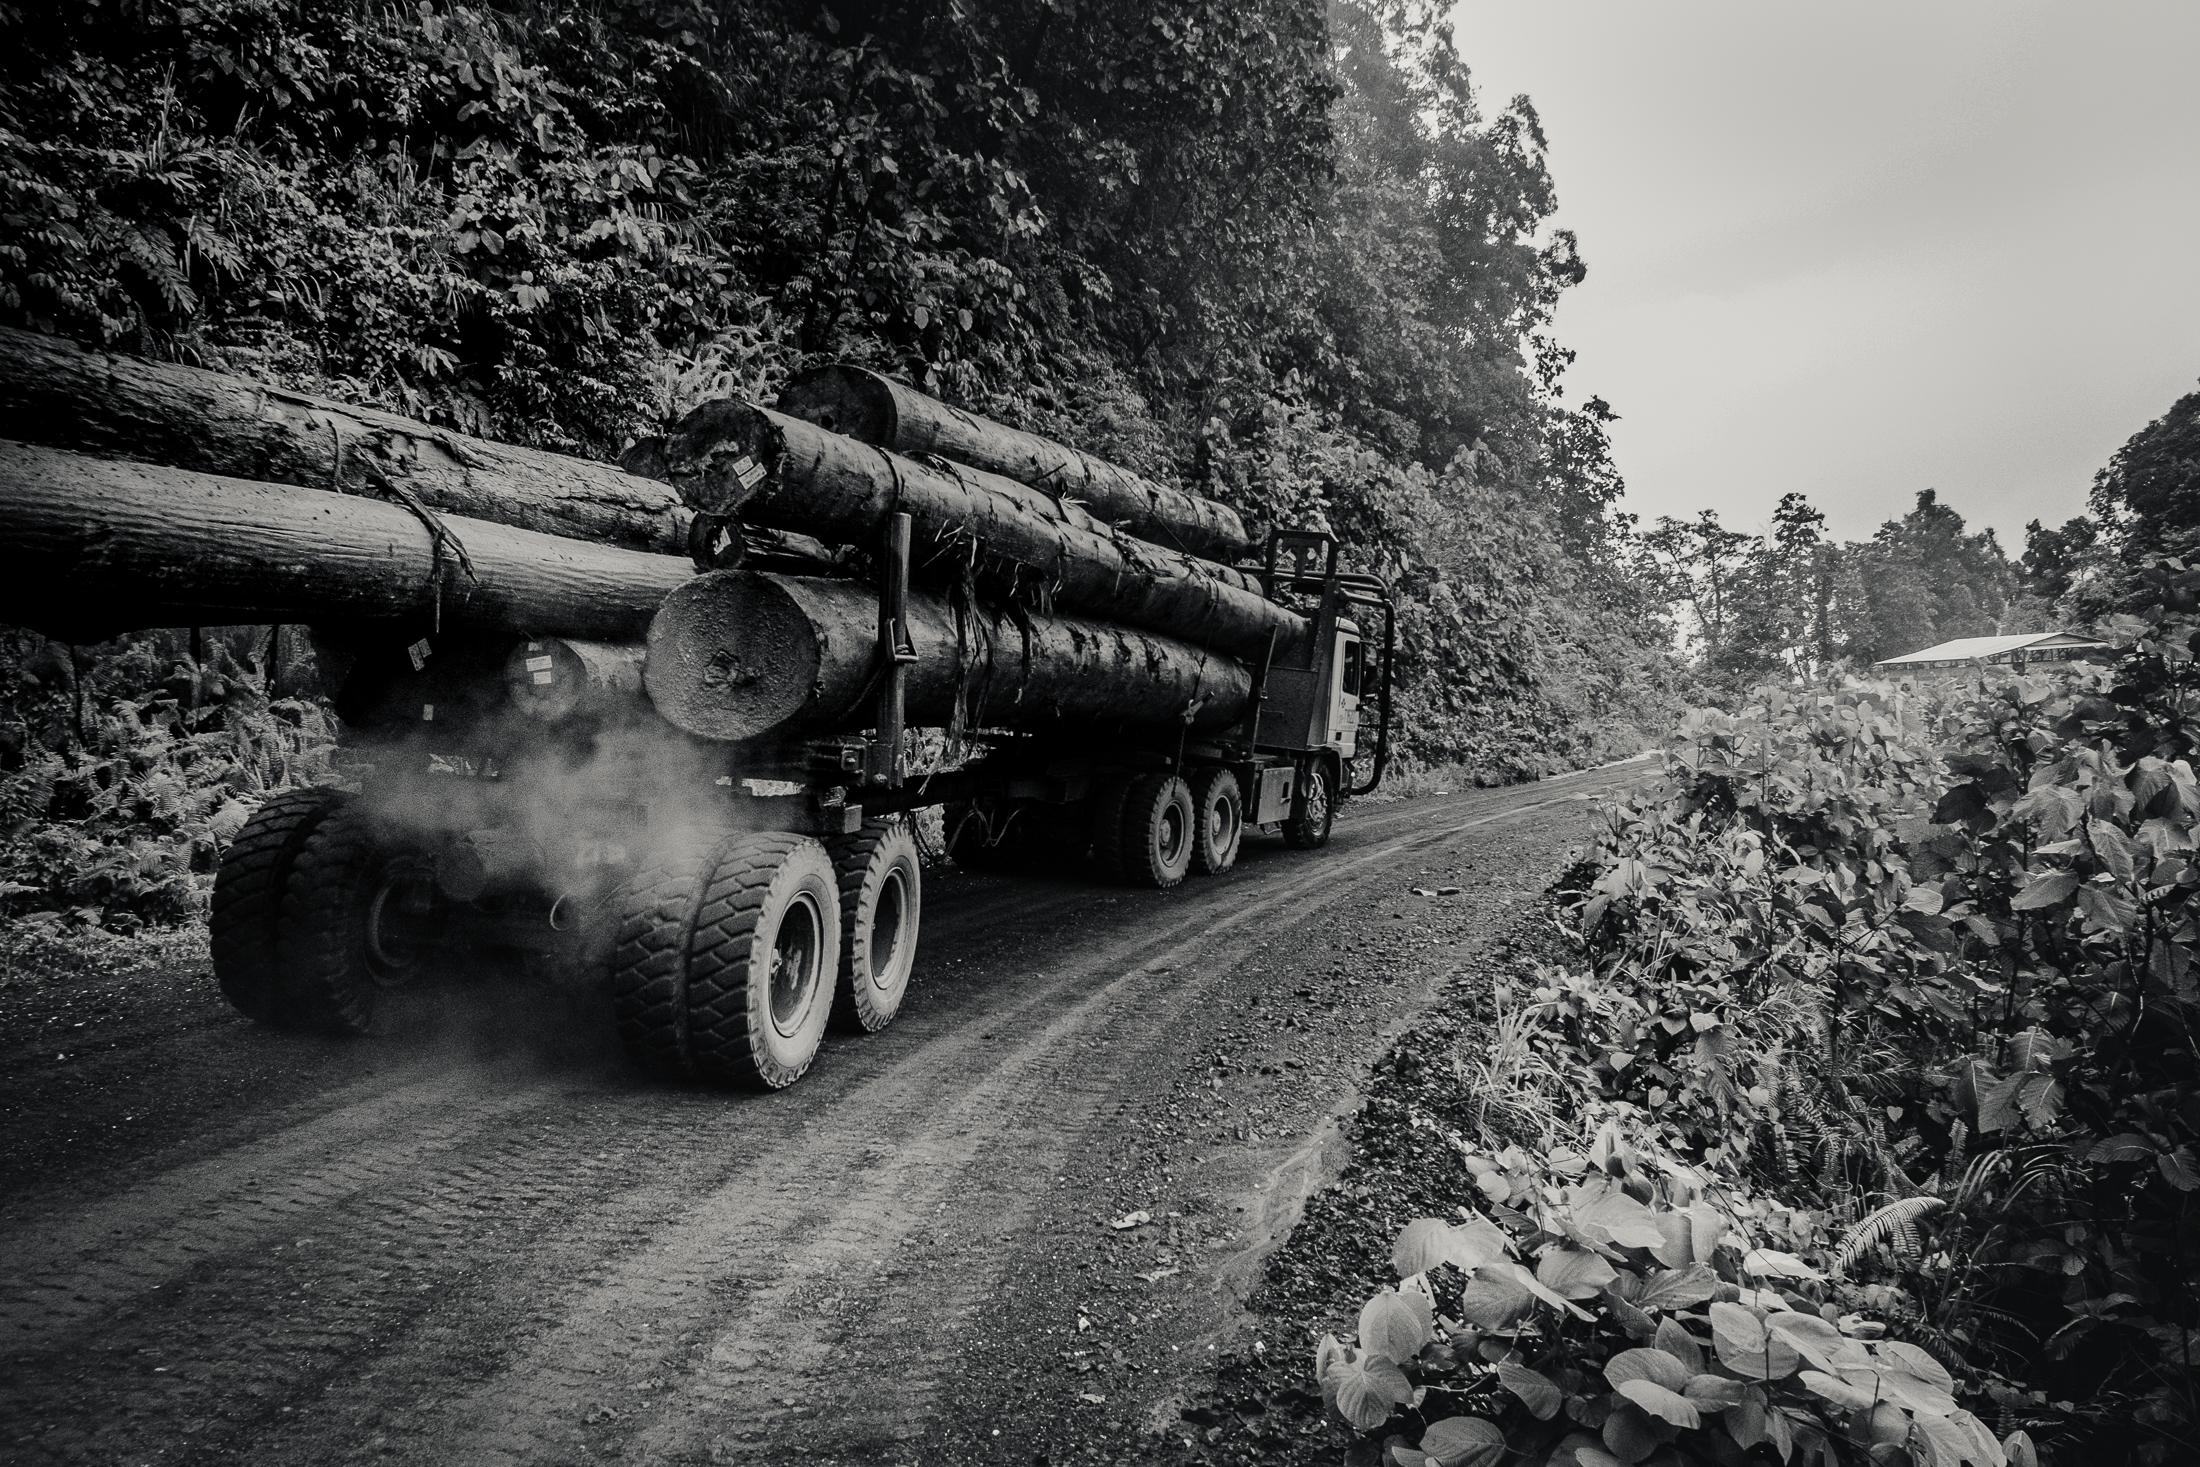 Indigenous Land Rights in Sarawak -  A logging truck passes 'Kilometre 15' - a...